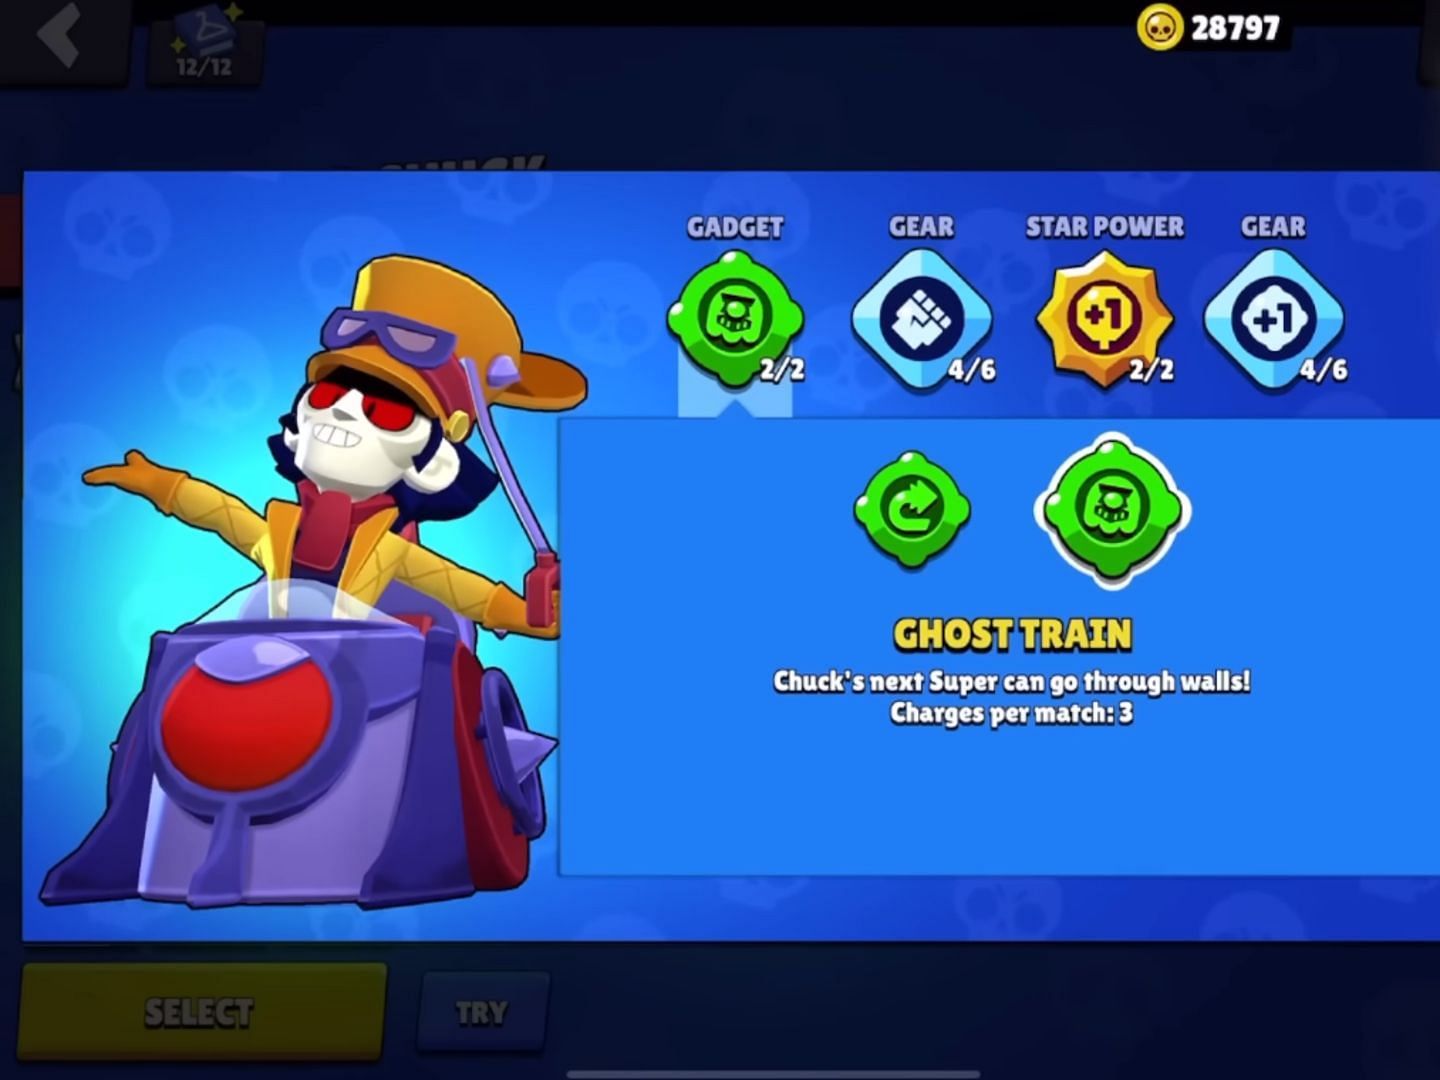 Ghost Train Gadget (Image via Supercell)